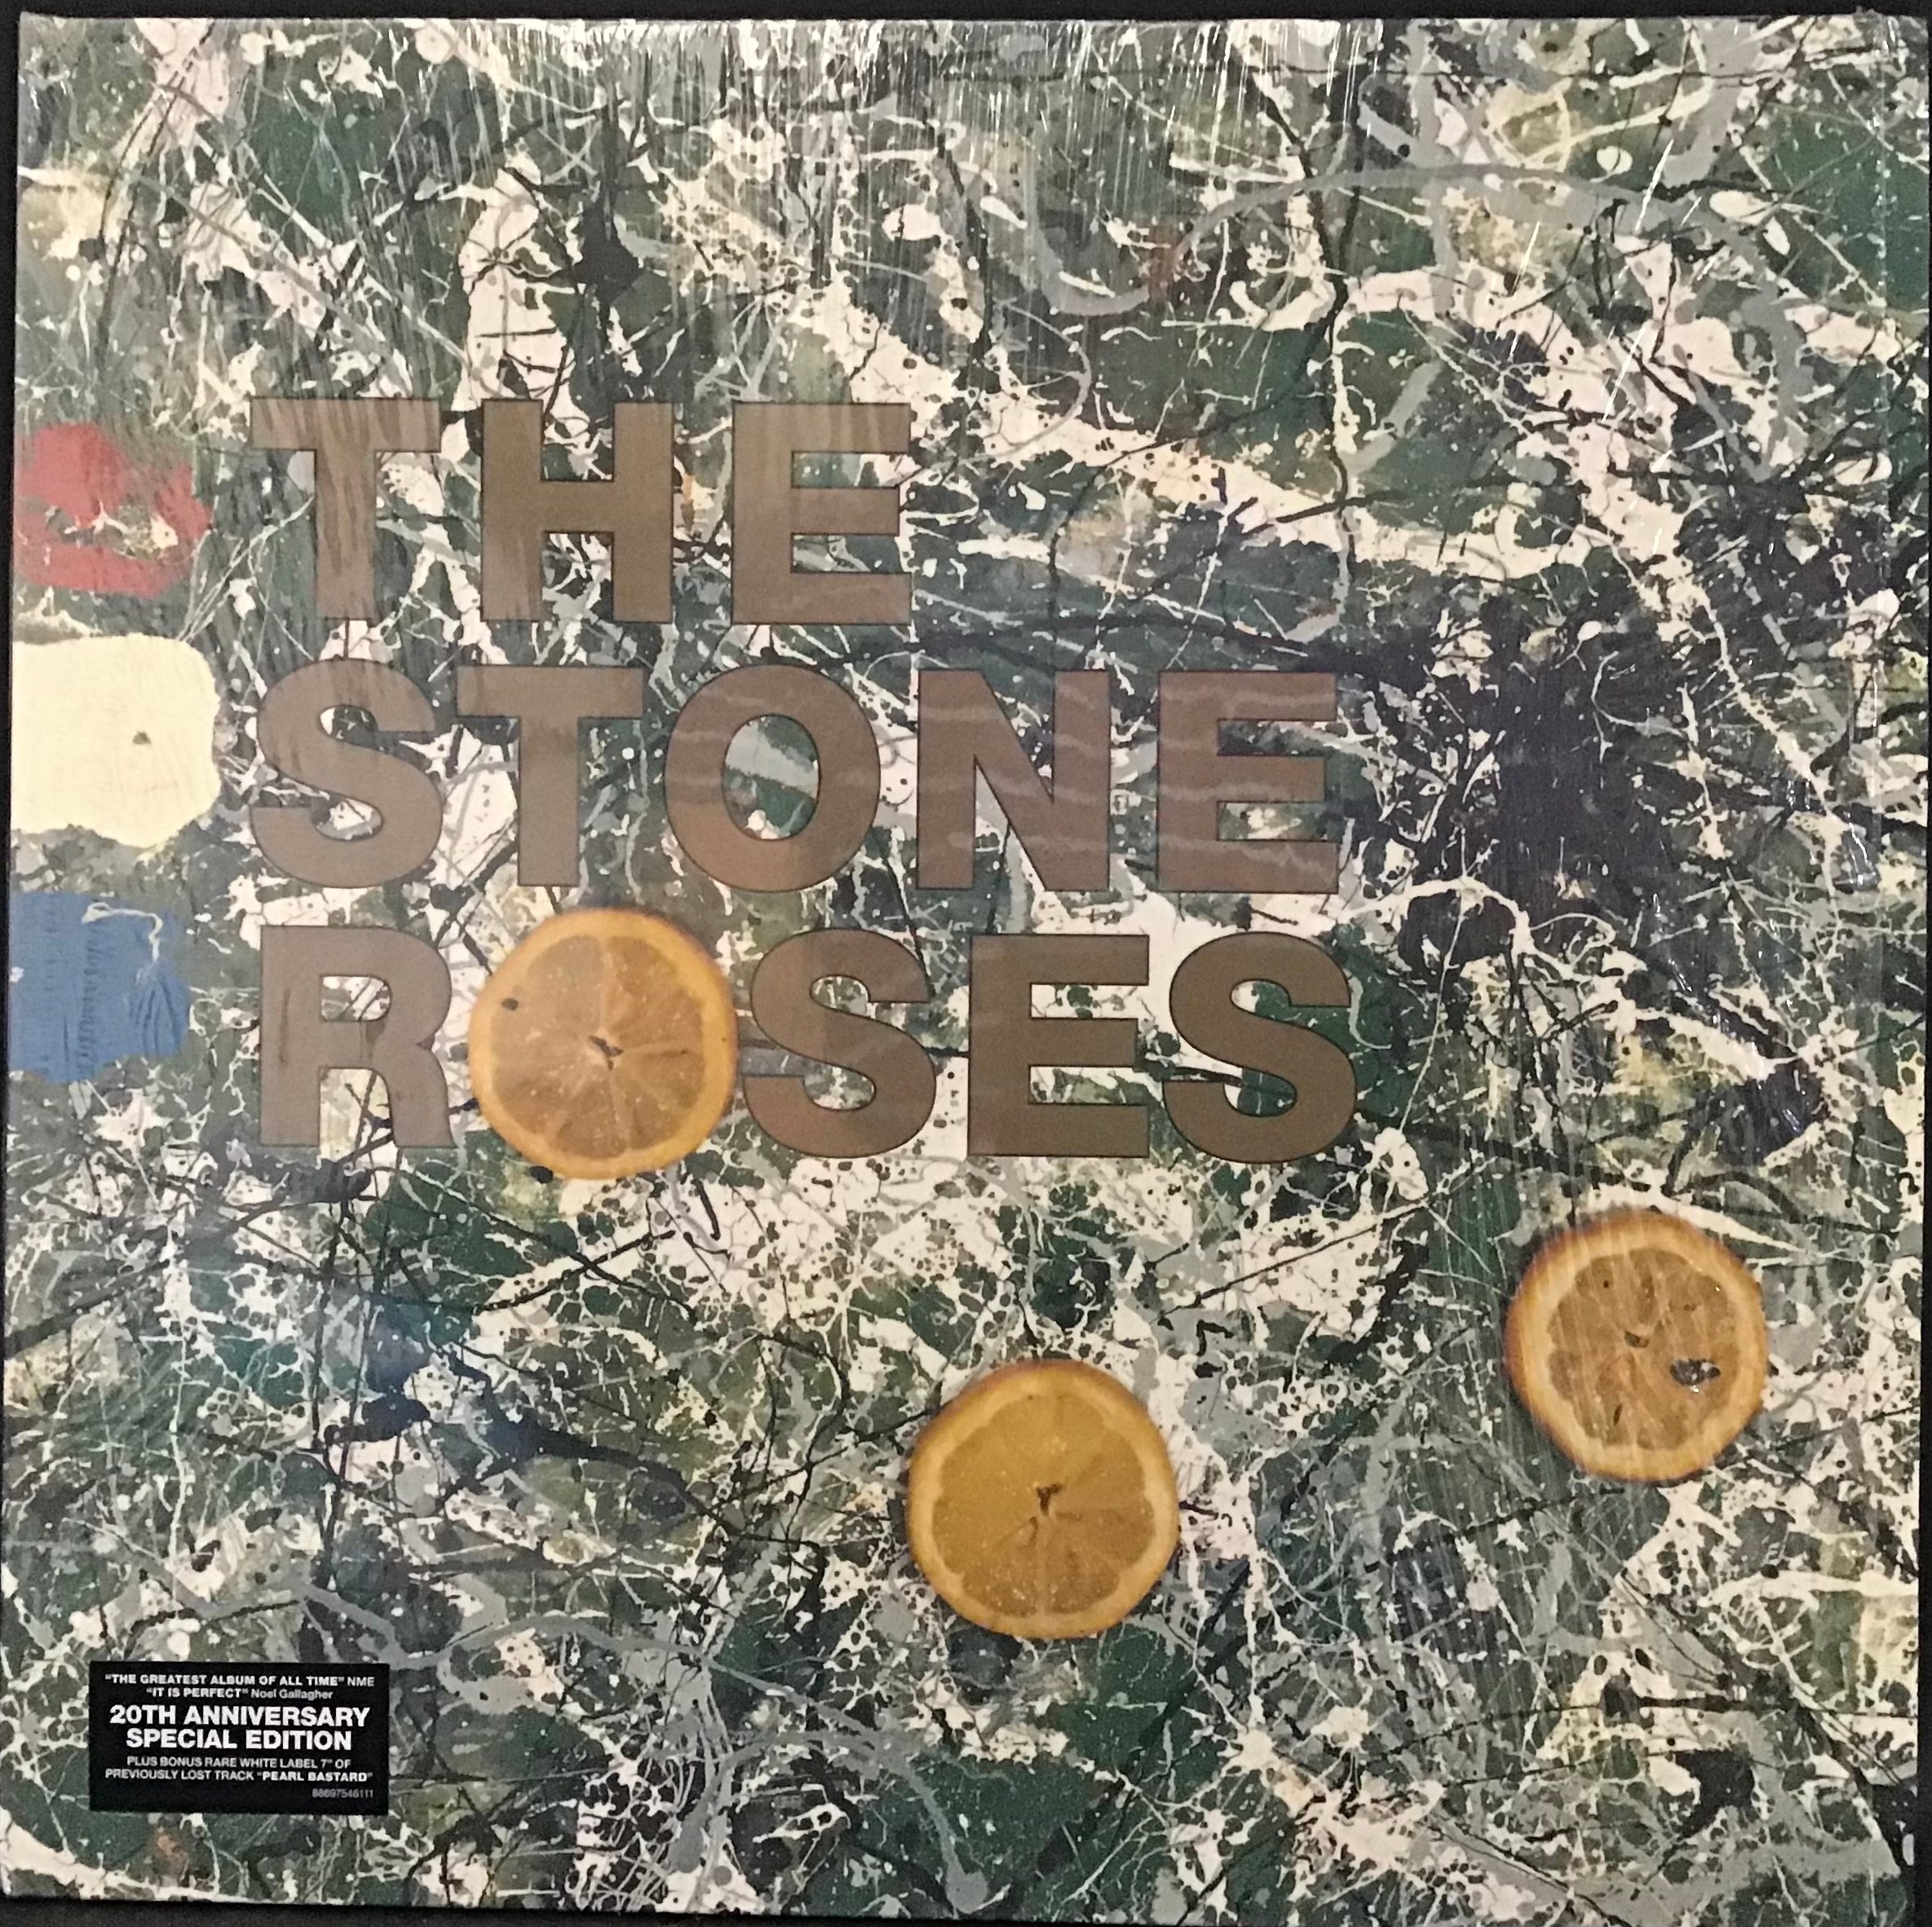 STONE ROSES SELF TITLED 20TH ANNIVERSARY SPECIAL EDITION VINYL